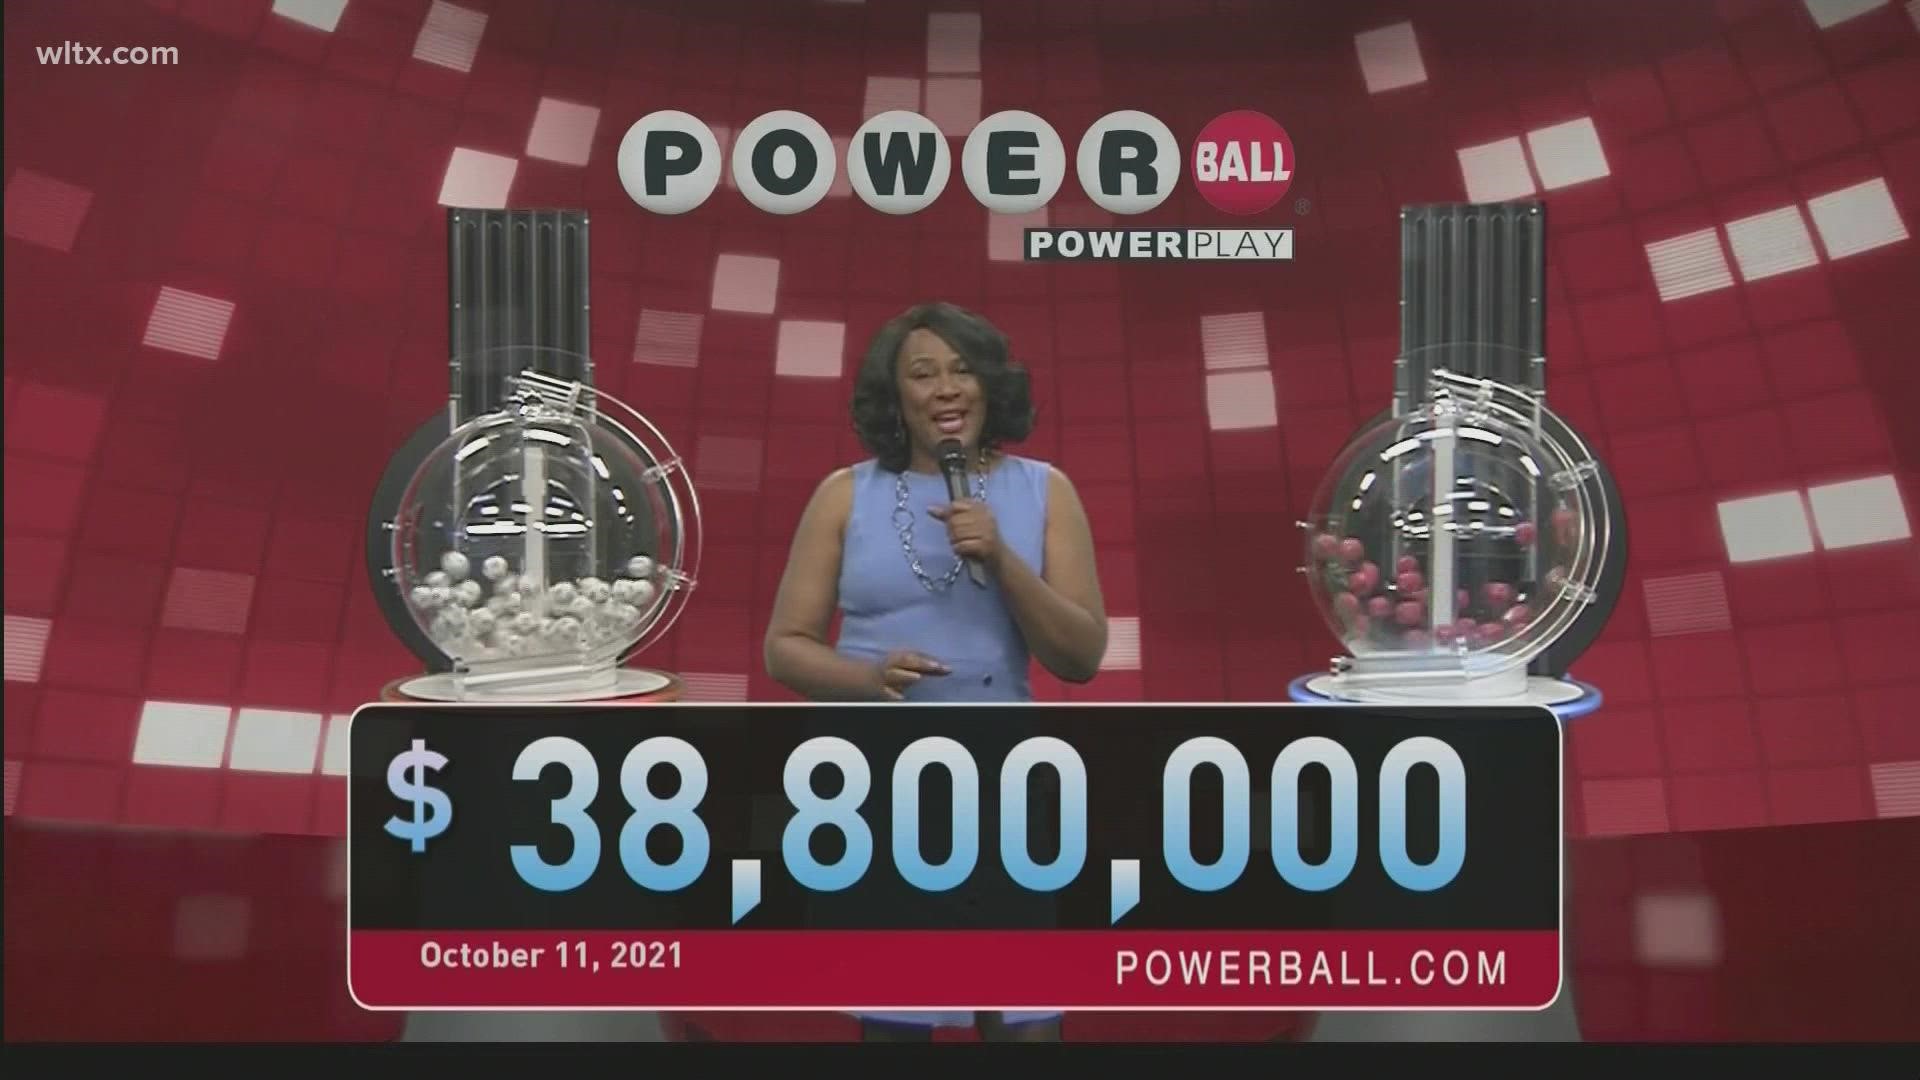 Here are the winning Powerball numbers for October 11, 2021.